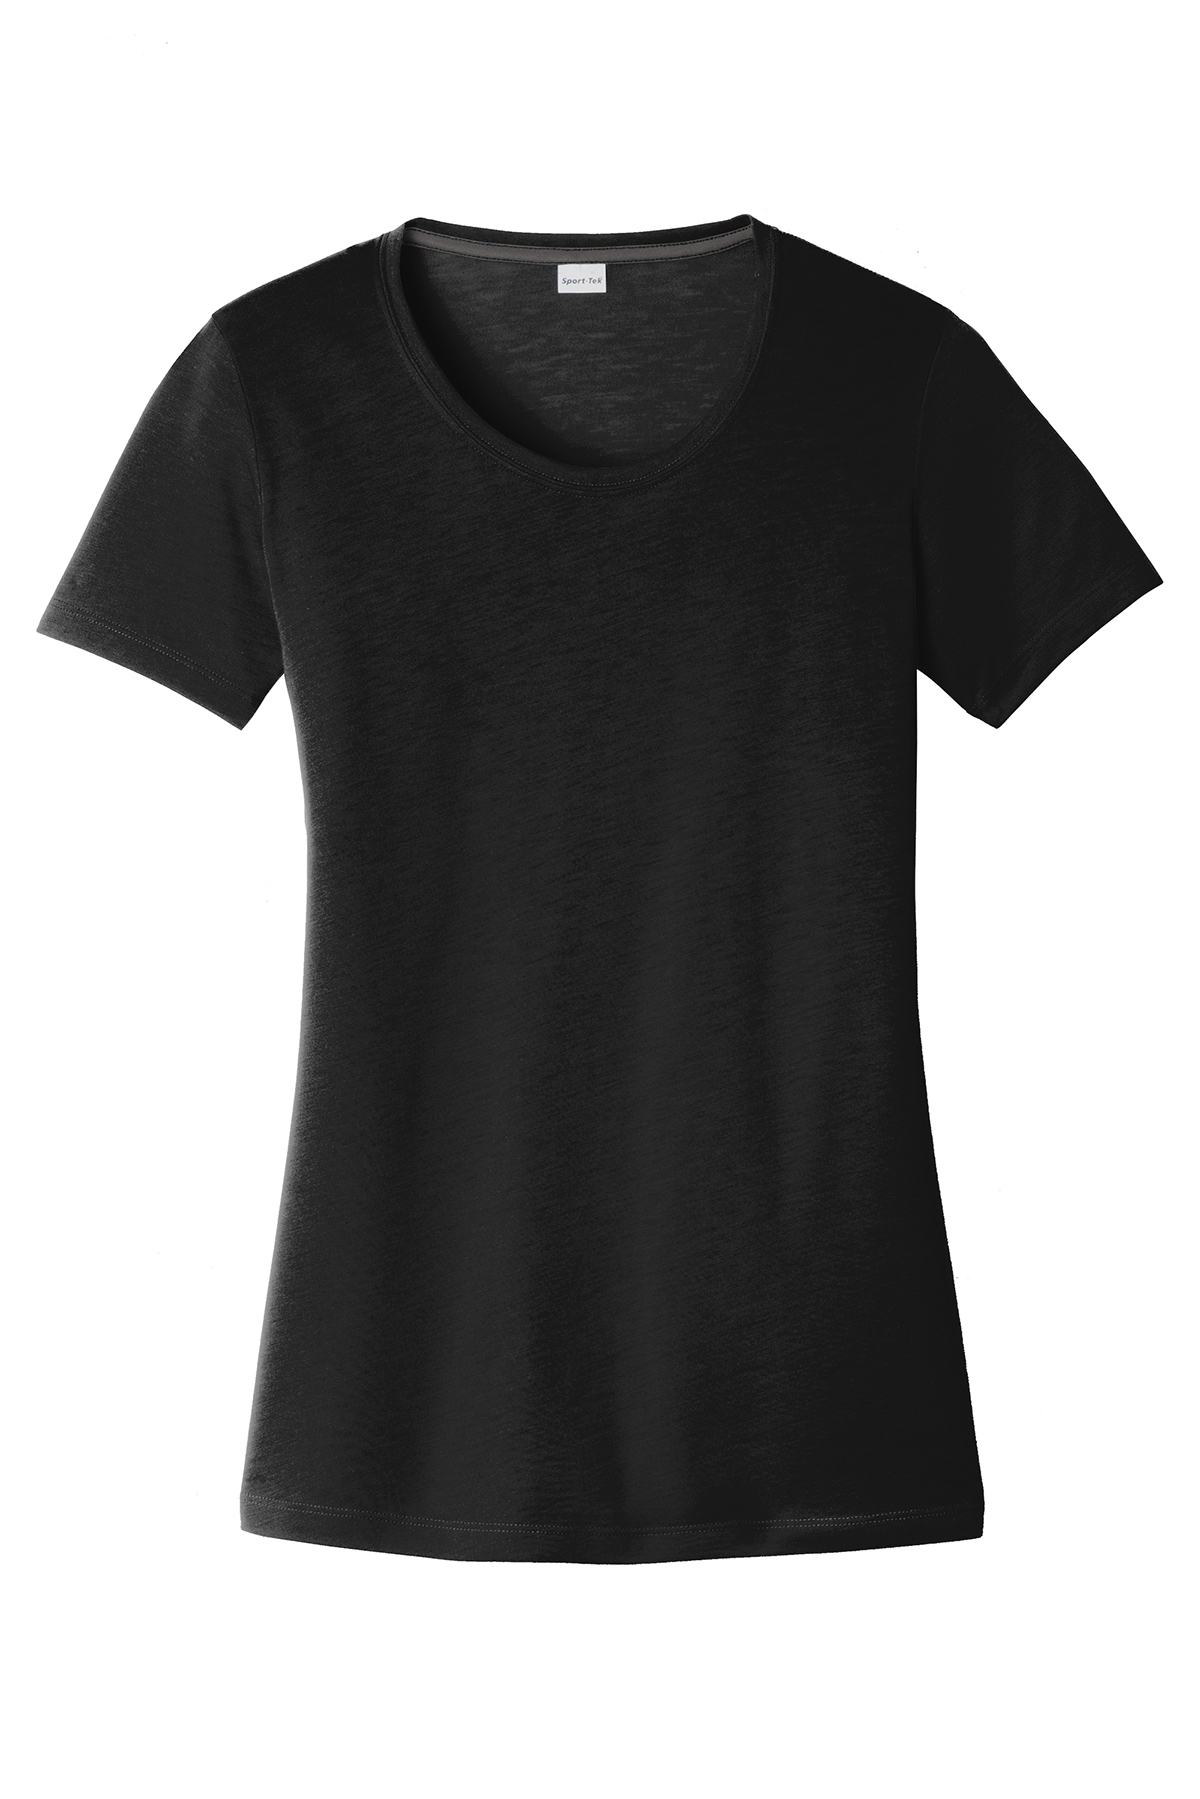 Sport-Tek Ladies PosiCharge Competitor™ Cotton Touch™ Scoop Neck Tee ...